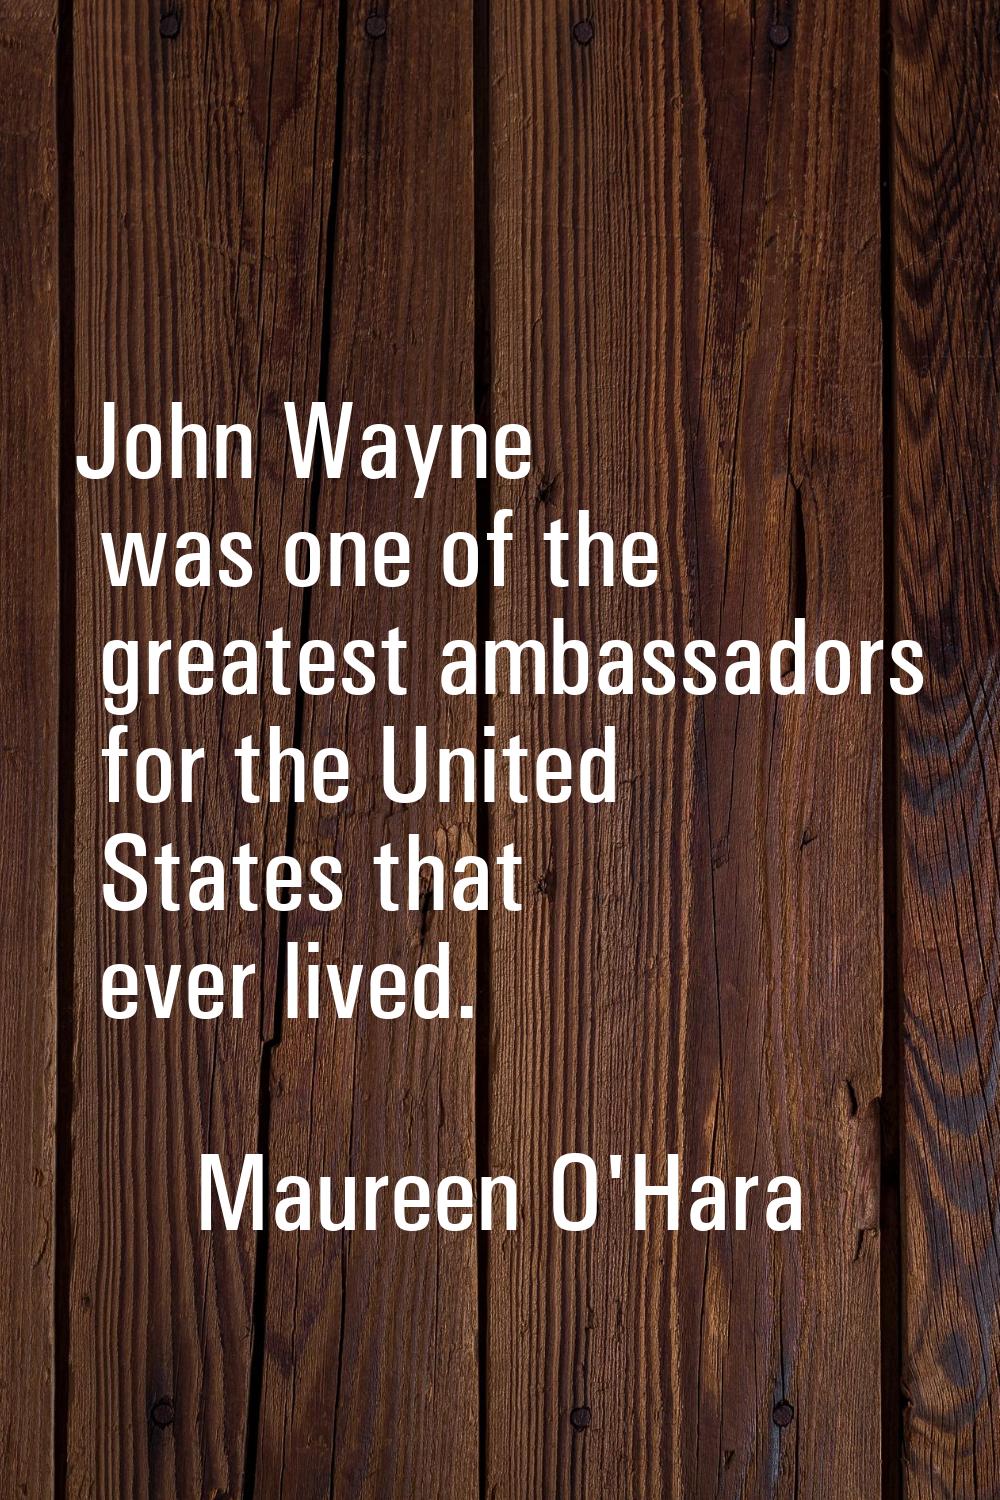 John Wayne was one of the greatest ambassadors for the United States that ever lived.